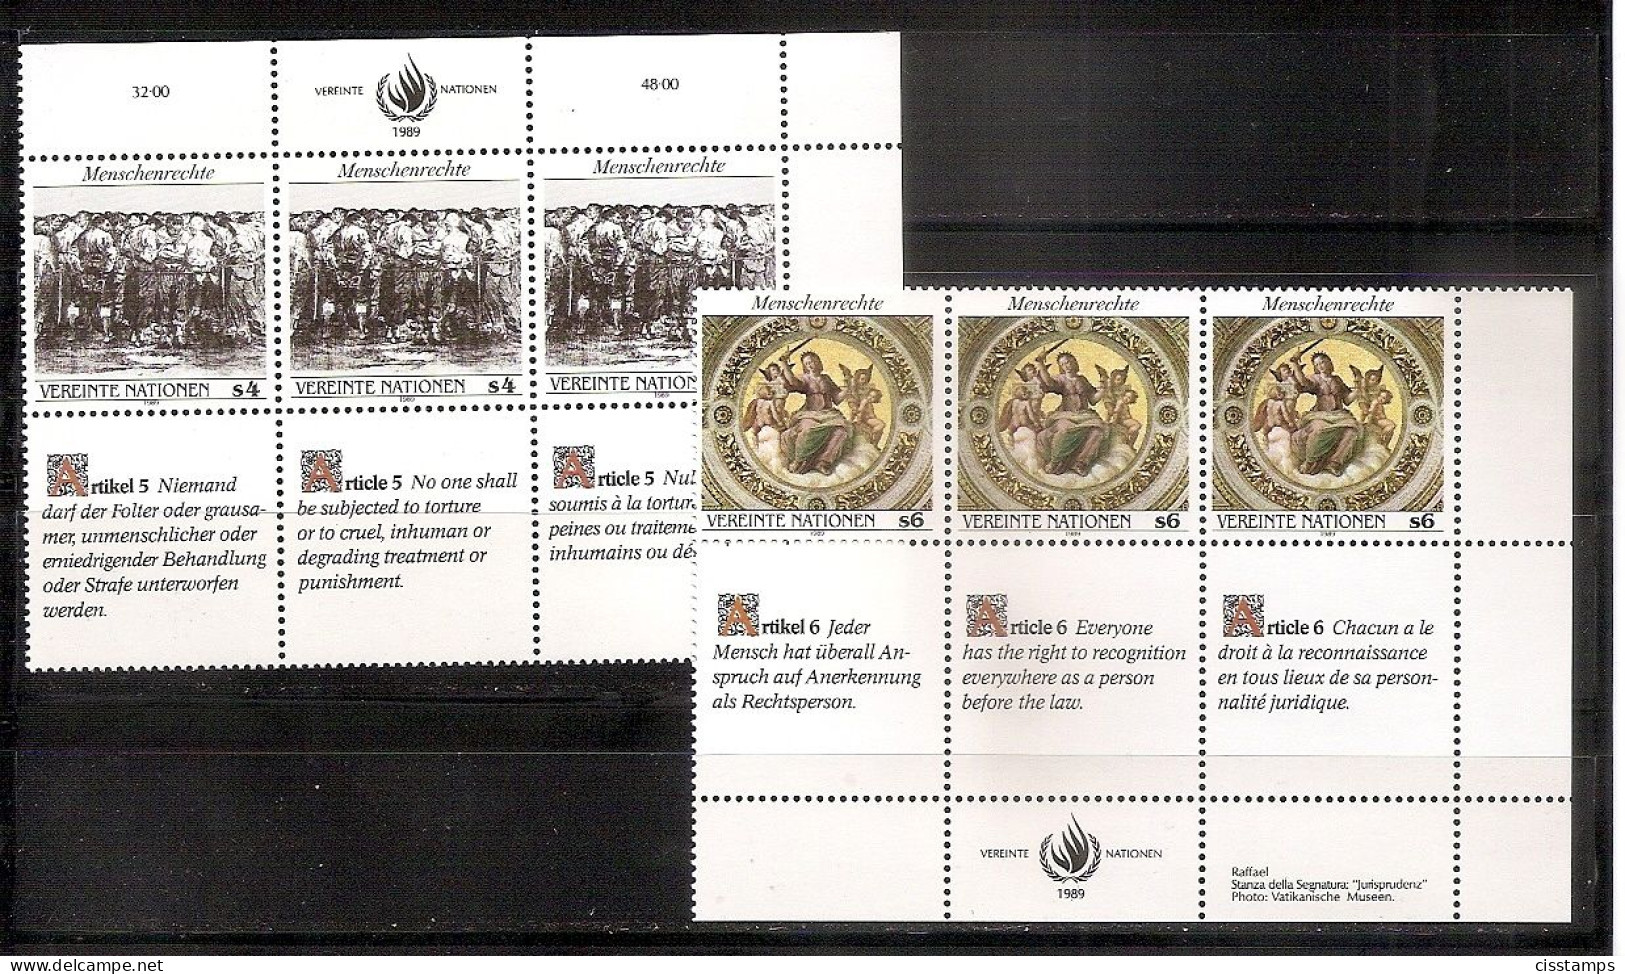 UNITED NATIONS VIENNA 1989● Human Rights●Mi 96-97●Strip Of 3 With TABS●MNH - Neufs